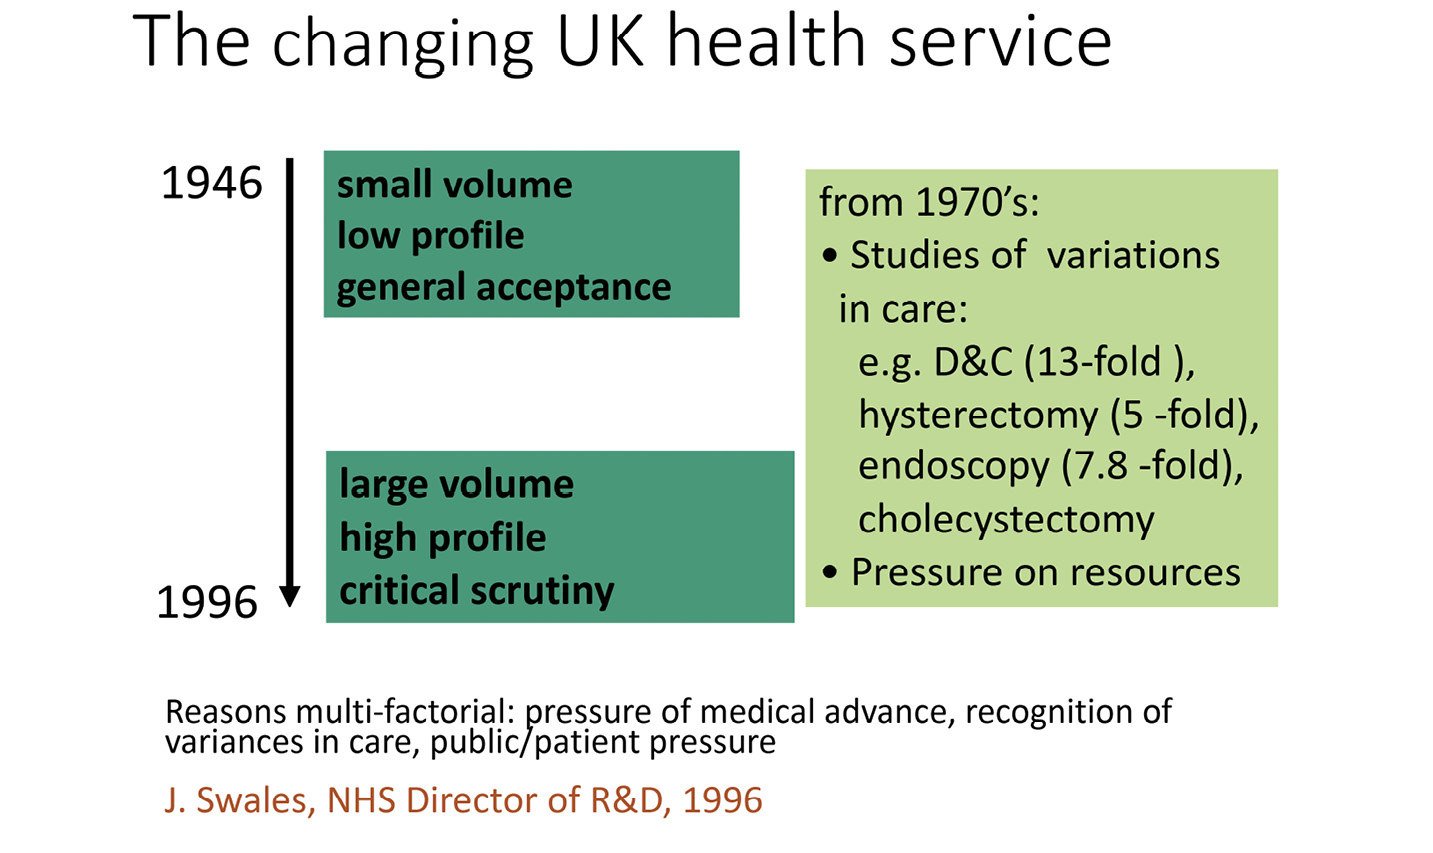 A text-rich diagram showing changes in the UK health service. It reads: 1846: small volume, low profile, general acceptance / from 1970’s: Studies in variations in care: e.g. D&C (13-fold), hysterectomy (5-fold), endoscopy (7.8-fold), cholecystectomy. Pressure on resources / 1996: large volume, high profile, critical scrutiny. Reasons multi-factorial: pressure of medical advance, recognition of variances in care, public/patient pressure. J. Swales, NHS Director of R&D, 1996.